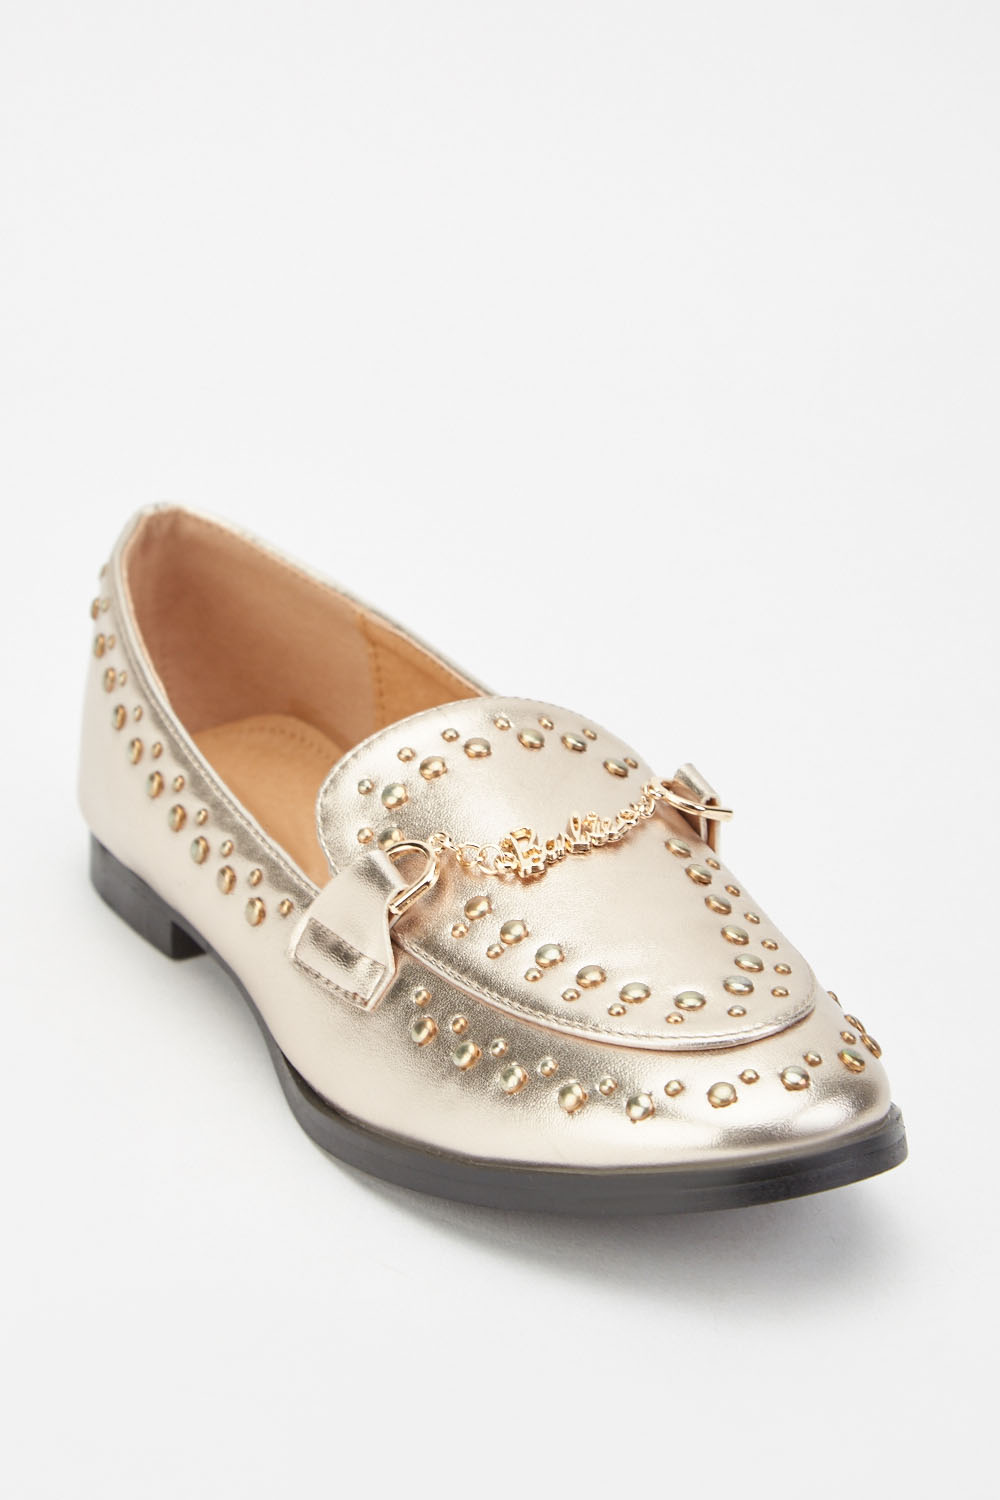 Studded Metallic Loafers - Just $7